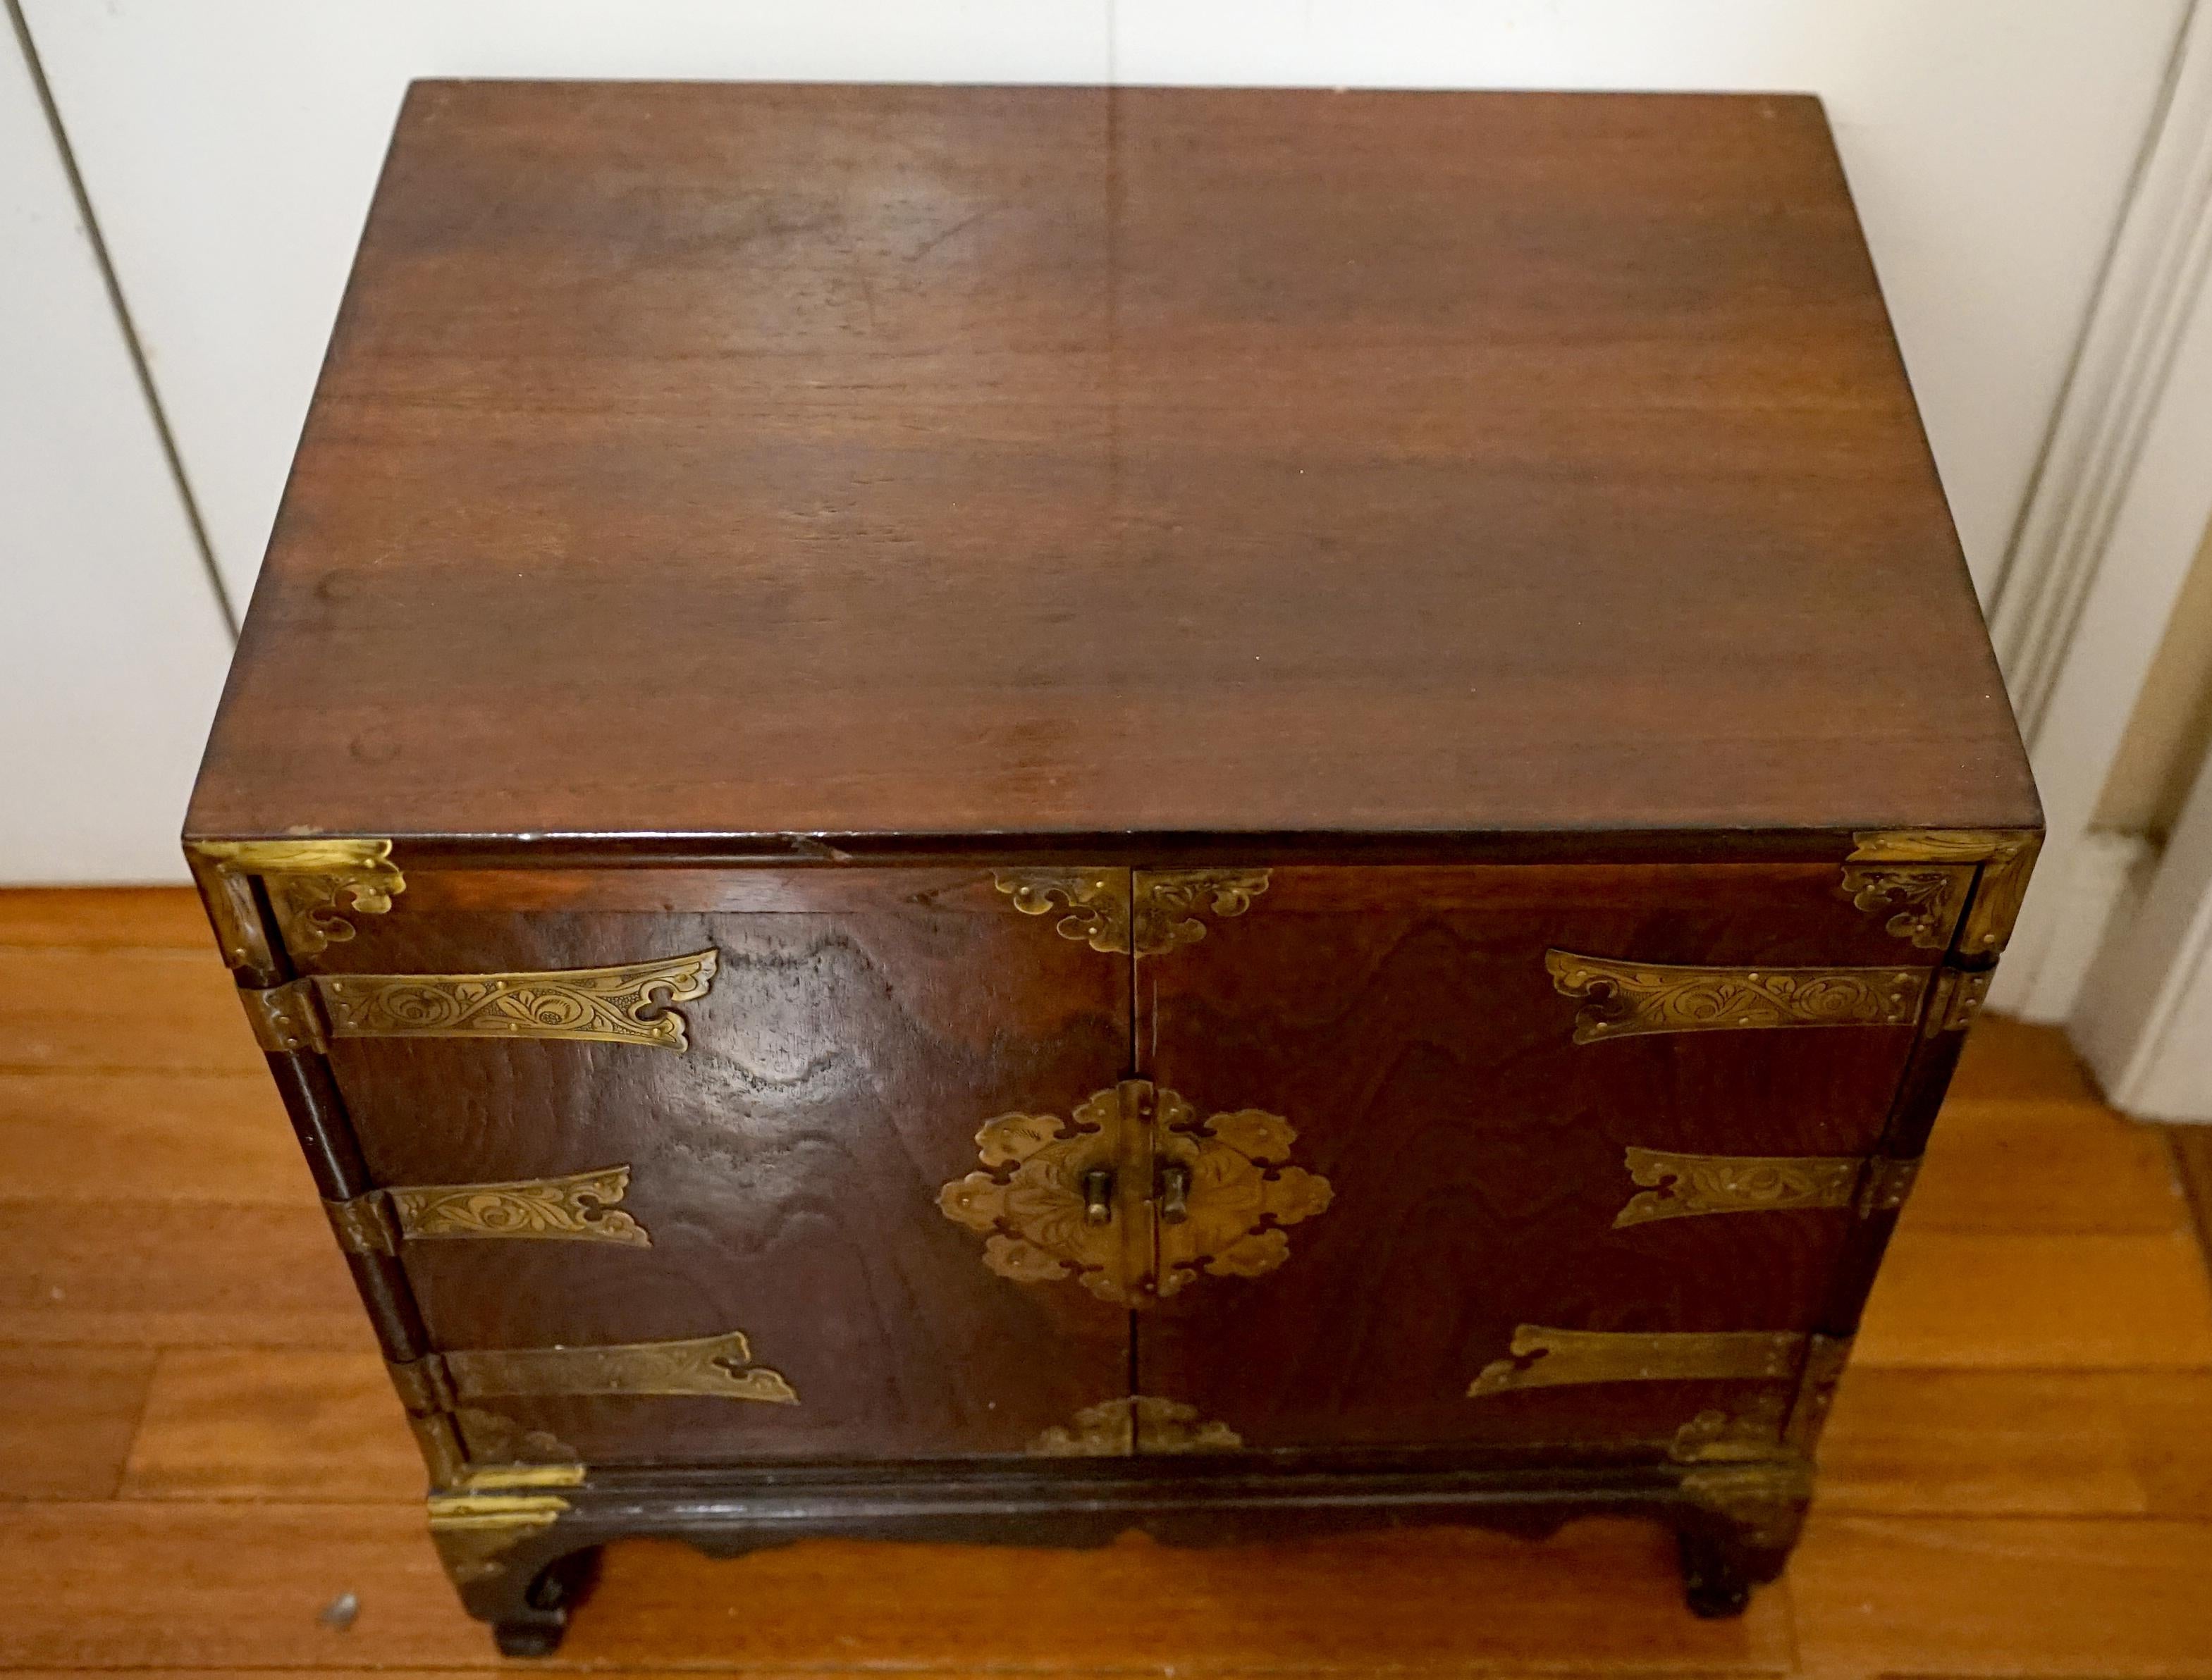 Vintage Burl Mahogany Tansu Chest with Paper Antique Calligraphy Lining For Sale 6